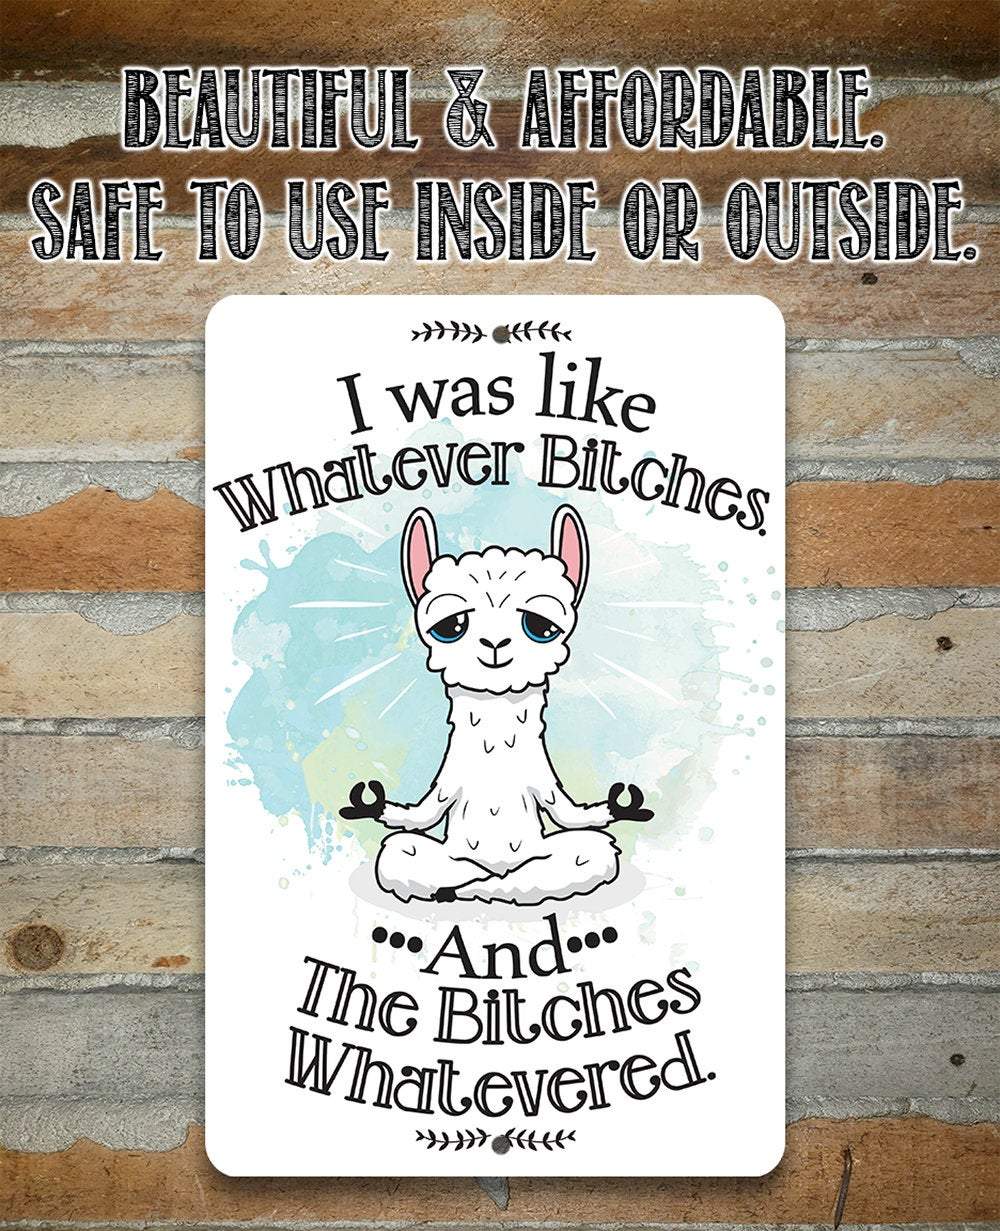 I Was Like Whatever Bitches and the Bitches Whatevered - Metal Sign | Lone Star Art.